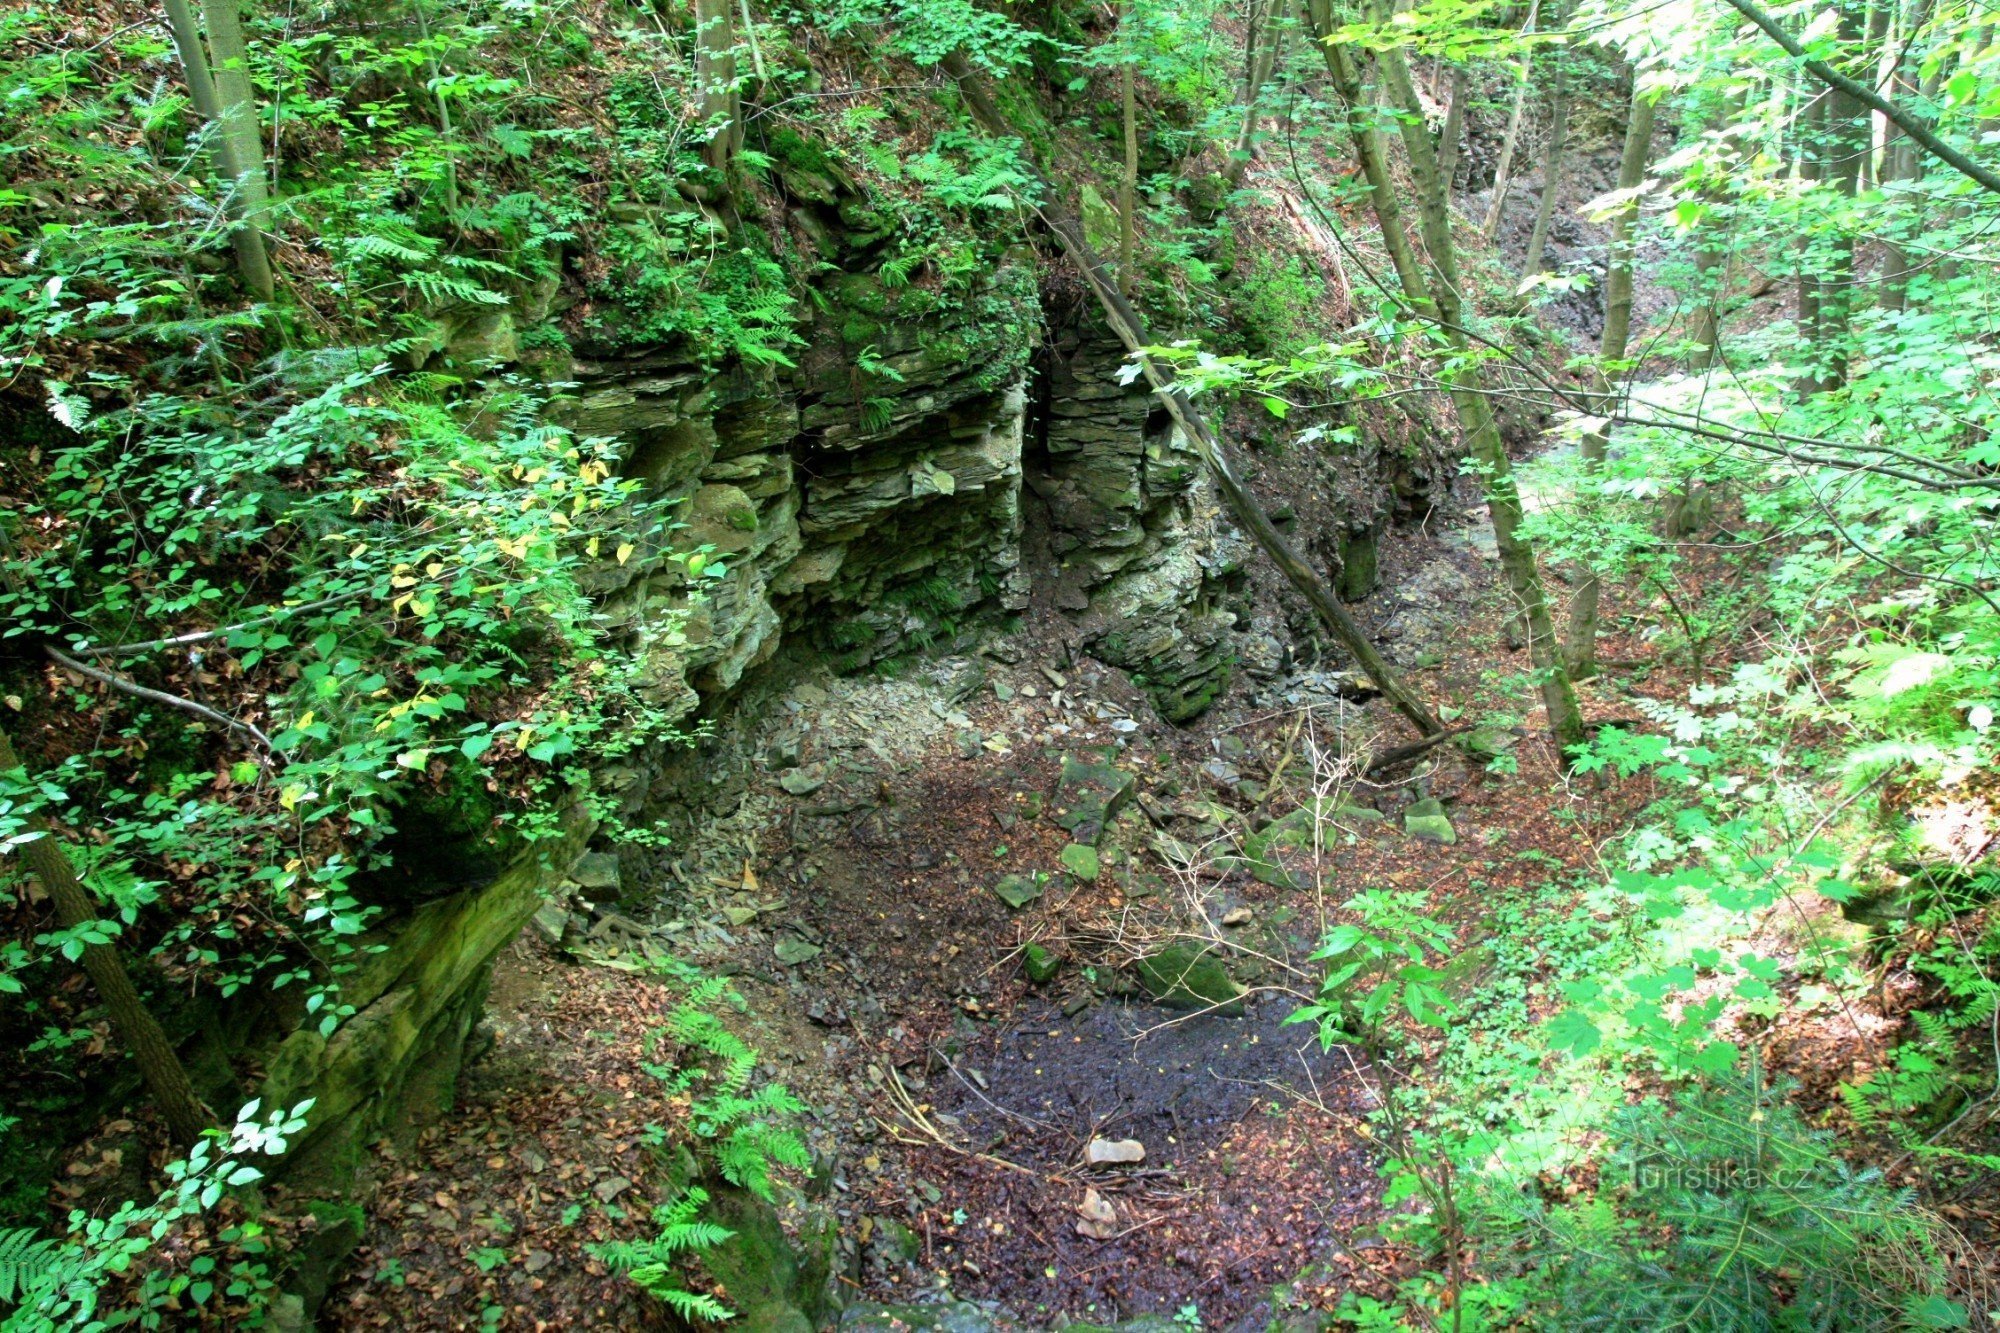 View from the footbridge into the gorge